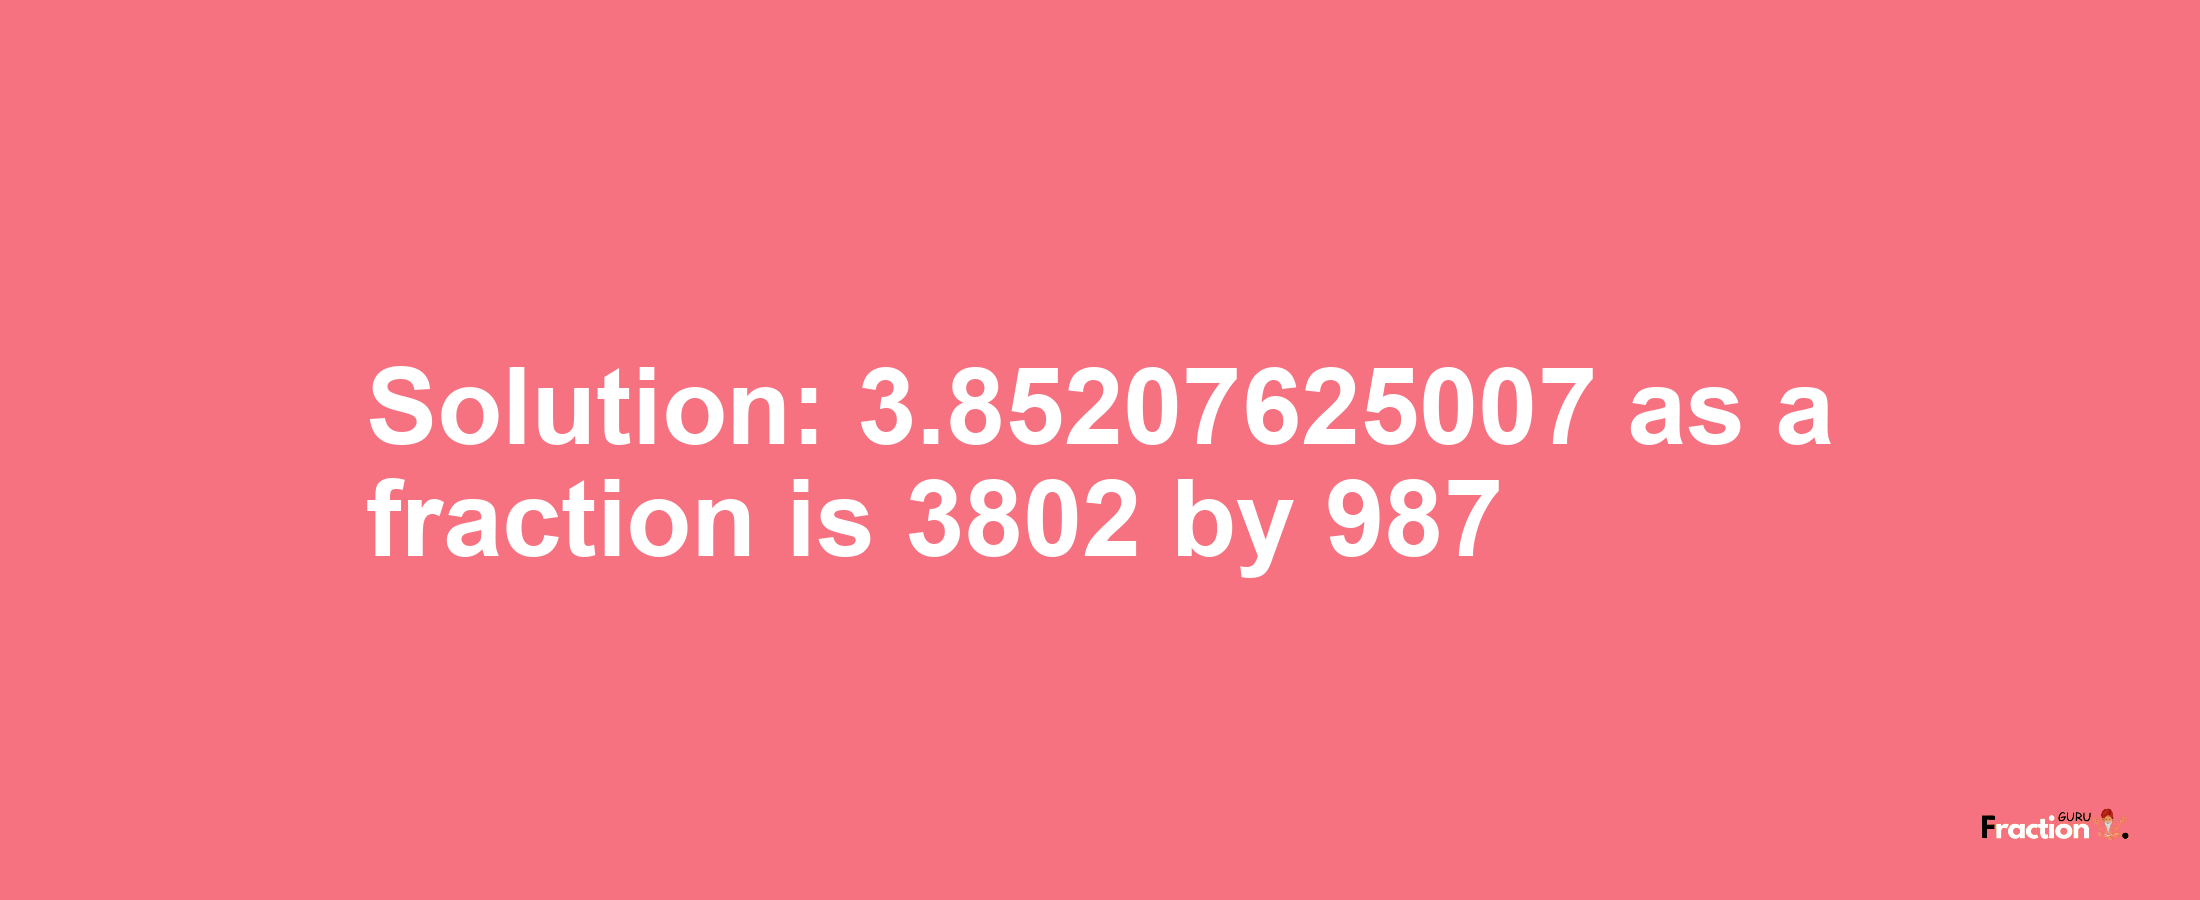 Solution:3.85207625007 as a fraction is 3802/987